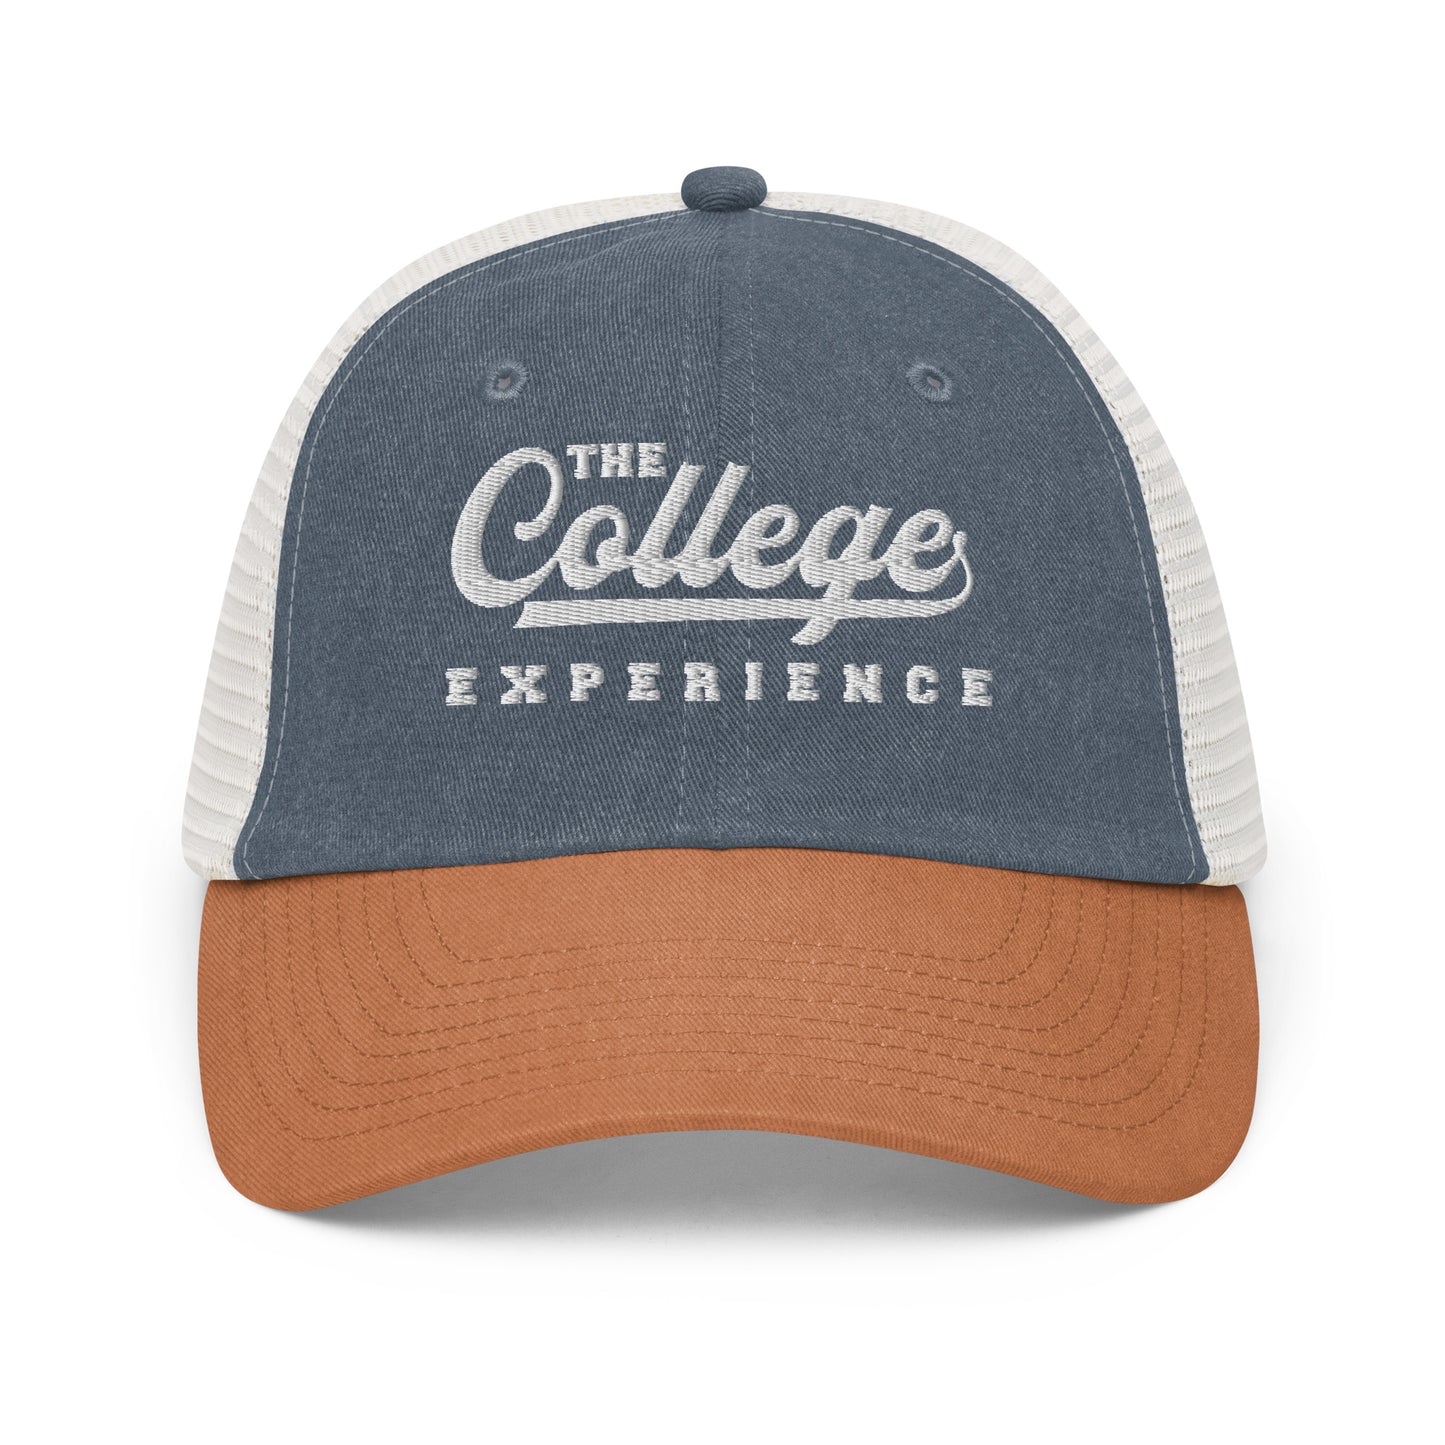 The College Experience - Pigment-dyed cap